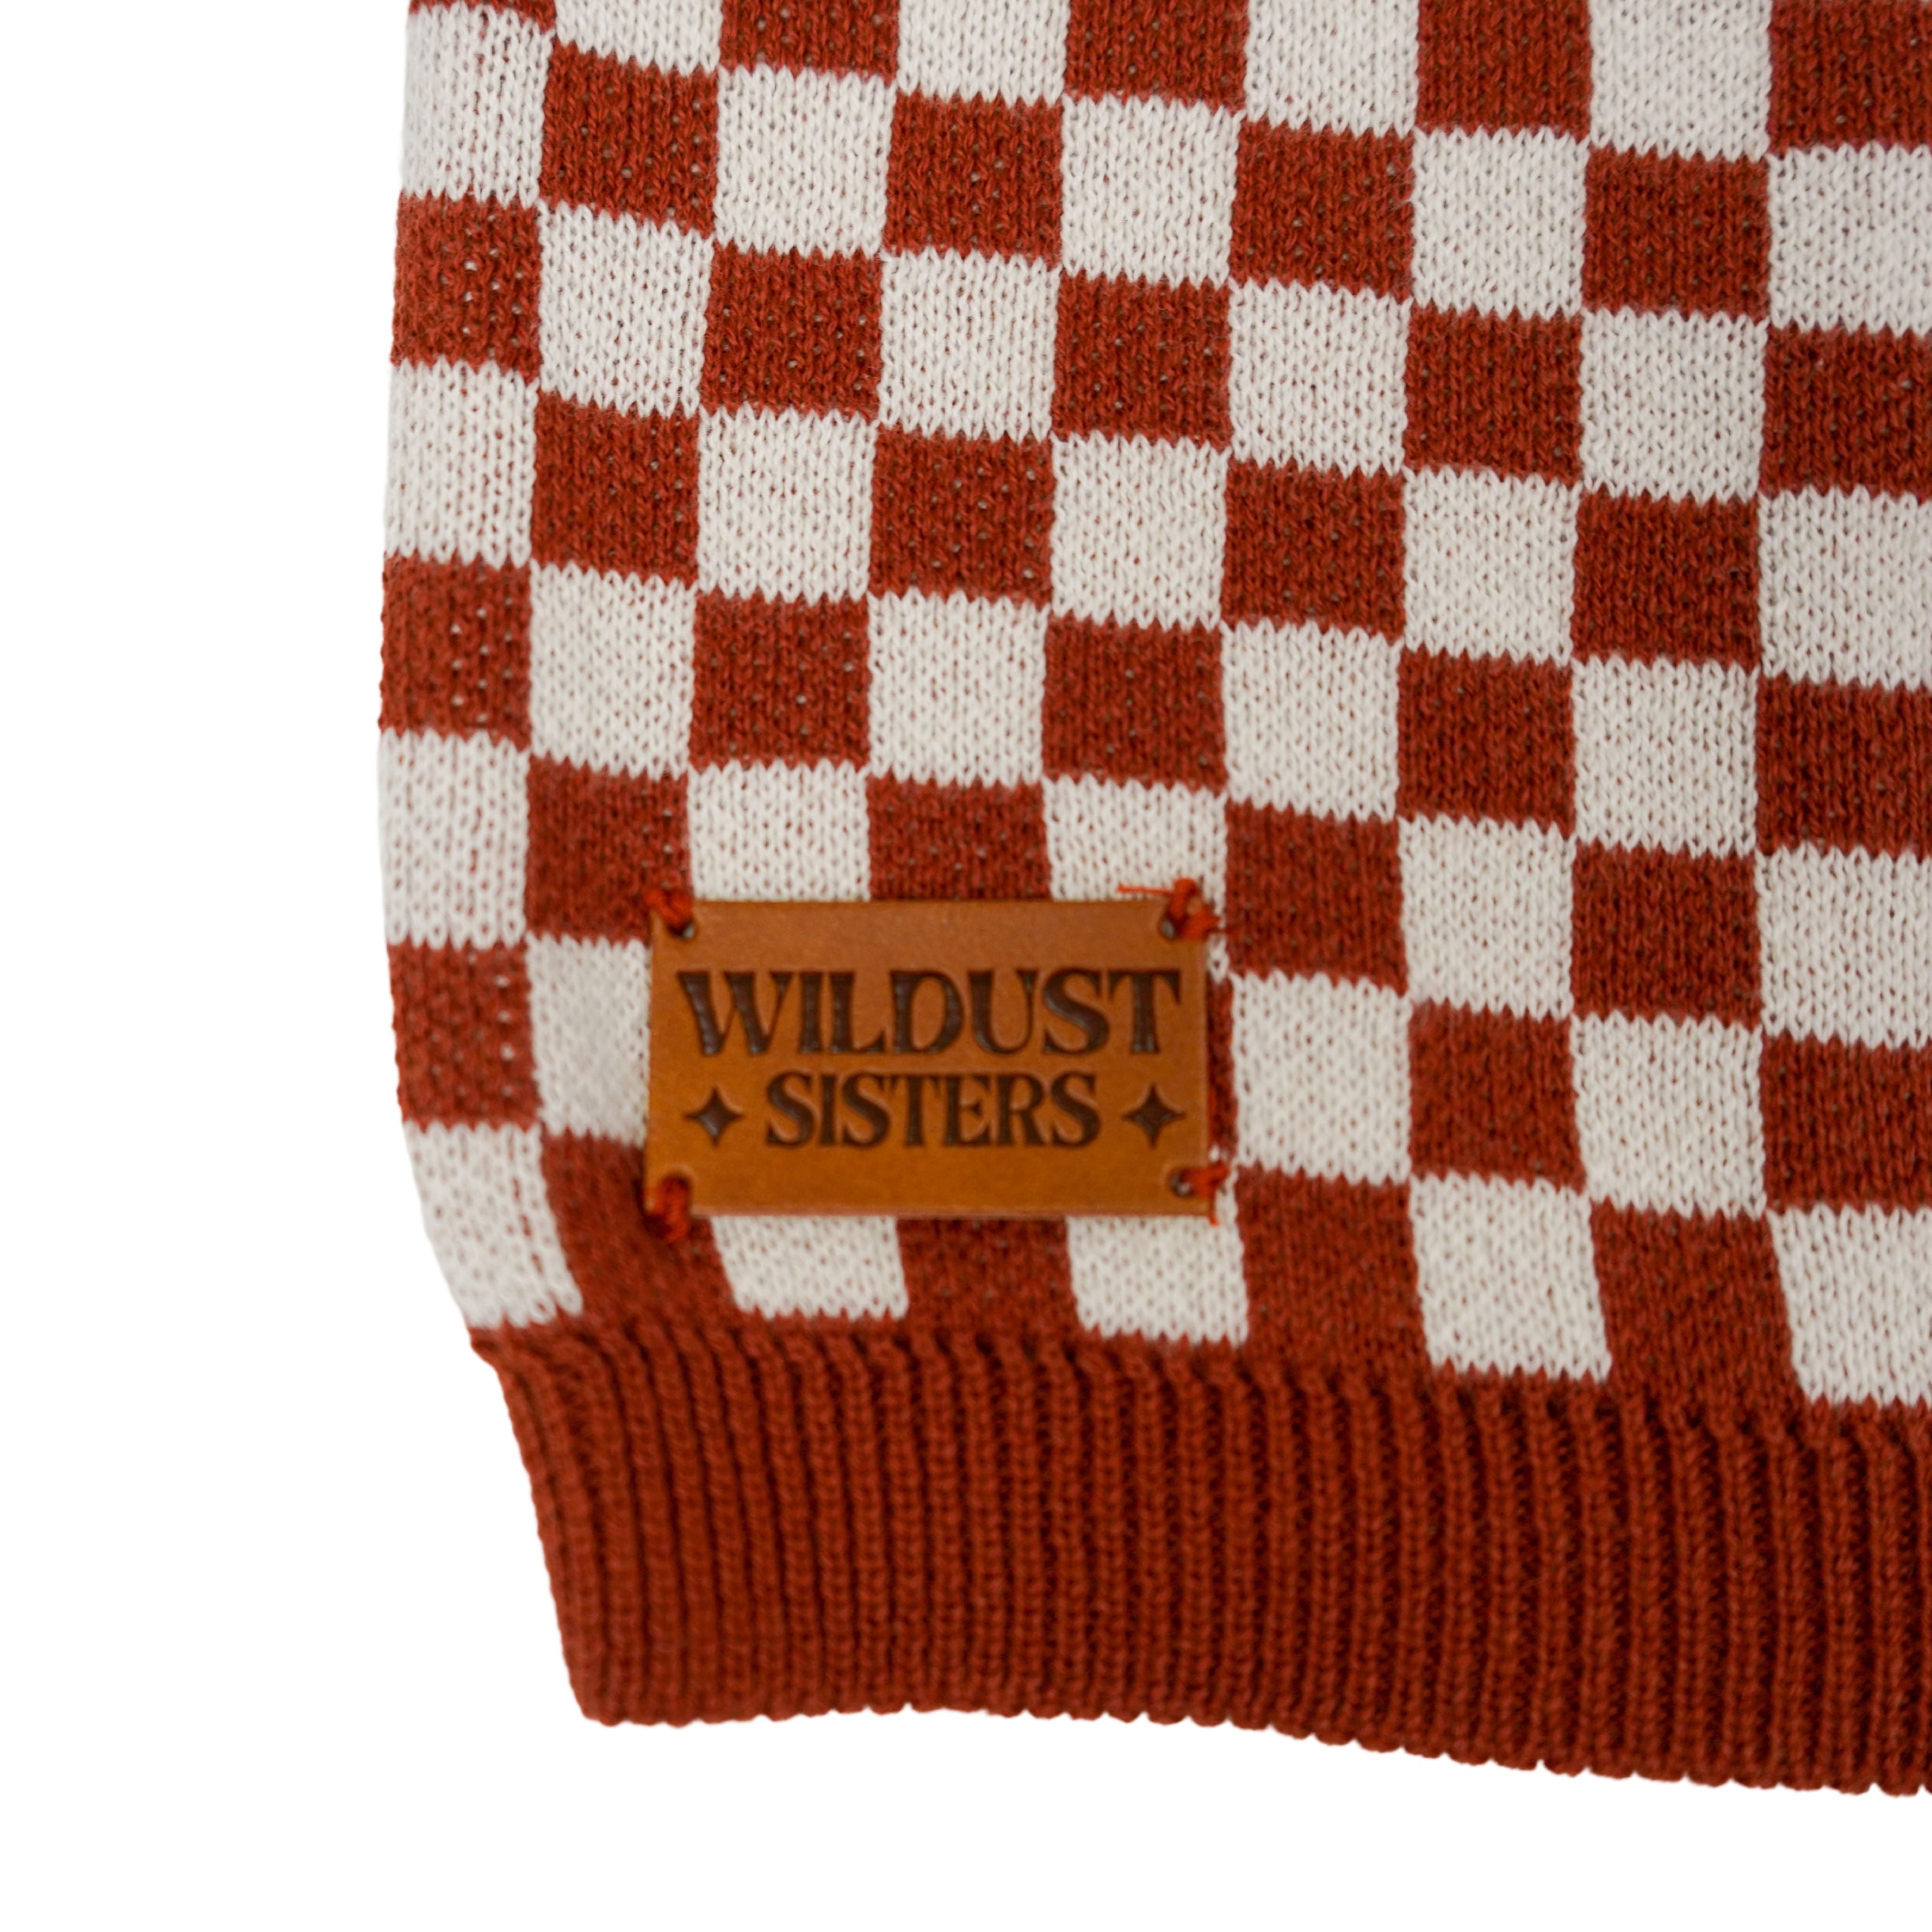 a wildust leather patch on a knitted red and white jumper with chessboard motives from Wildust